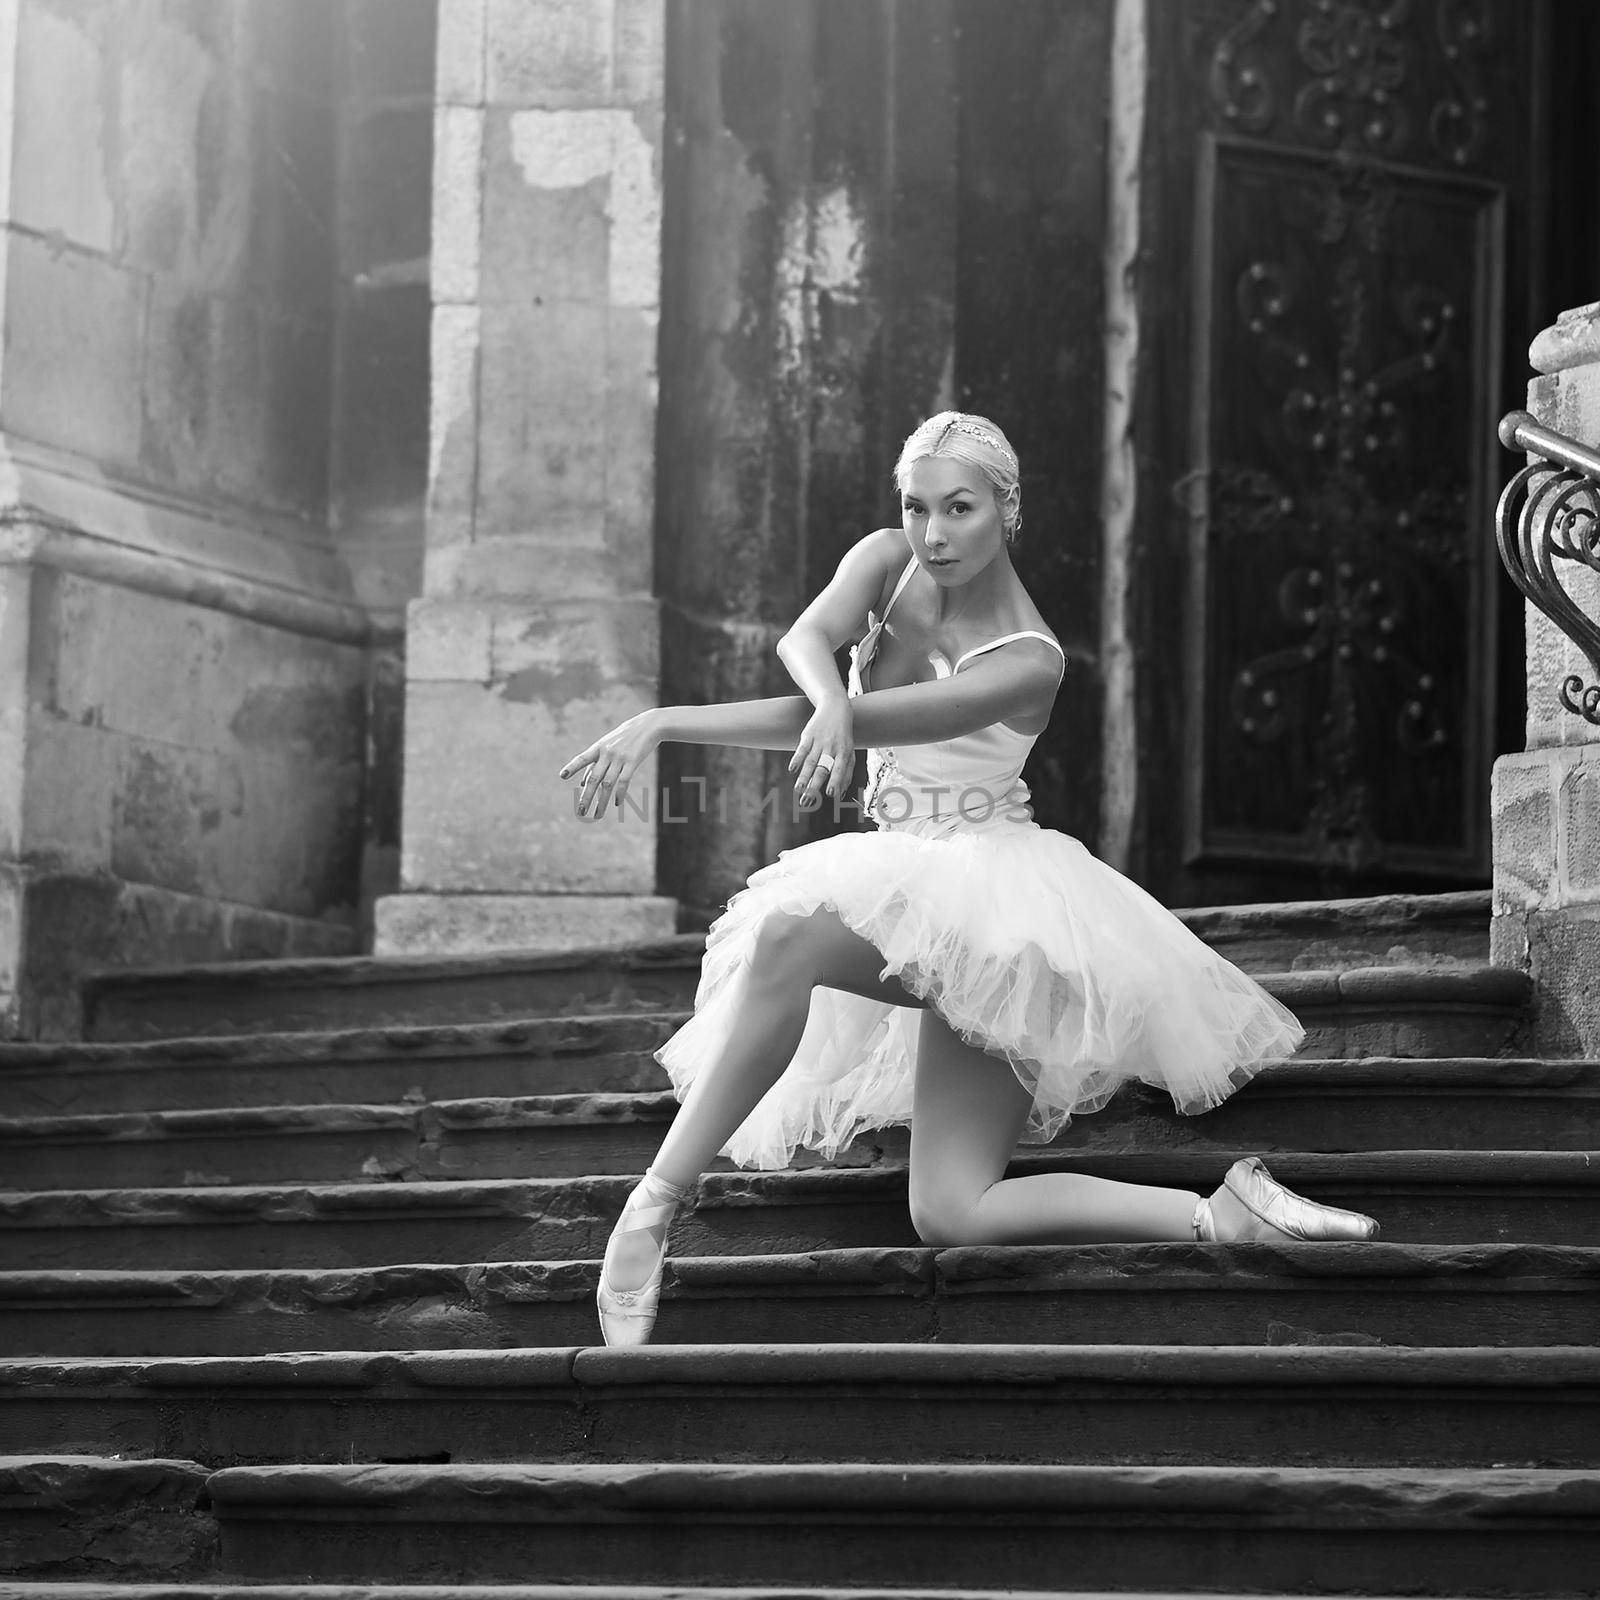 Practicing everywhere. Outdoors monochrome soft focus shot of a ballerina dancing on a stairway